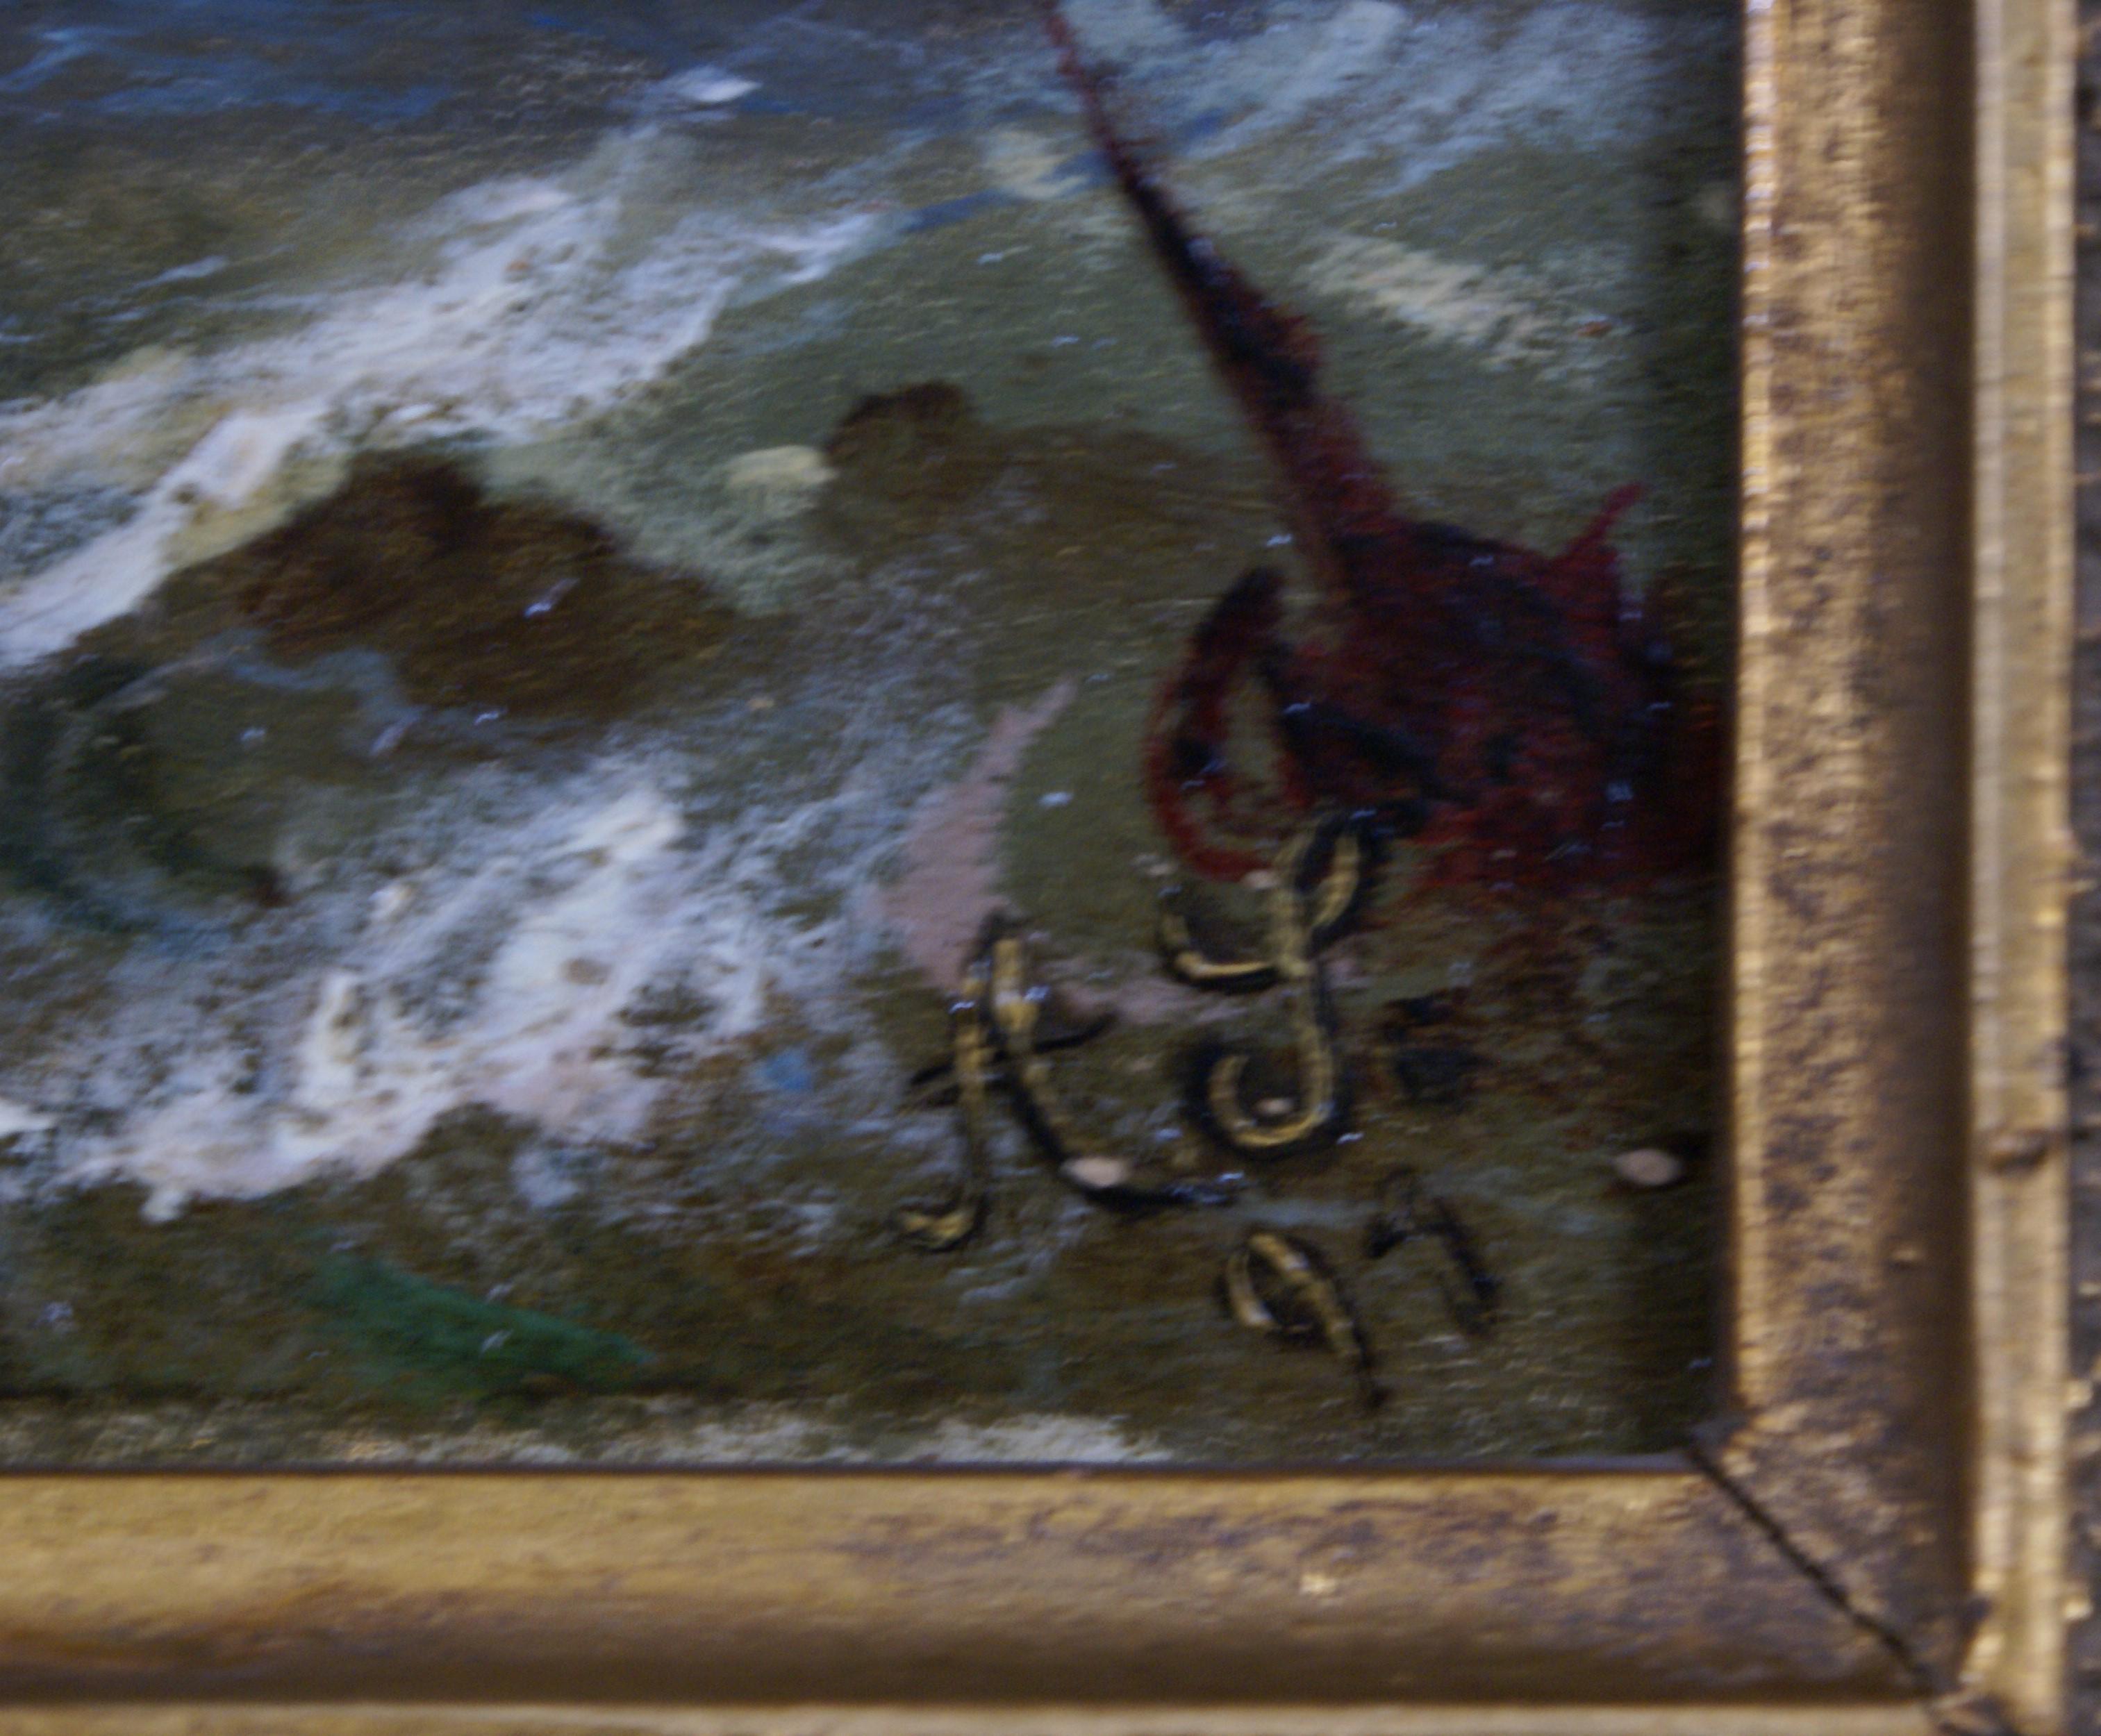 Oil on board of a grounded ship in tumultuous waters; housed in an ornate frame. Measurements of board are 8 1/2 x 10 1/2; frame measures 15 x 17 x 2 1/2. Monogram of artist reads 